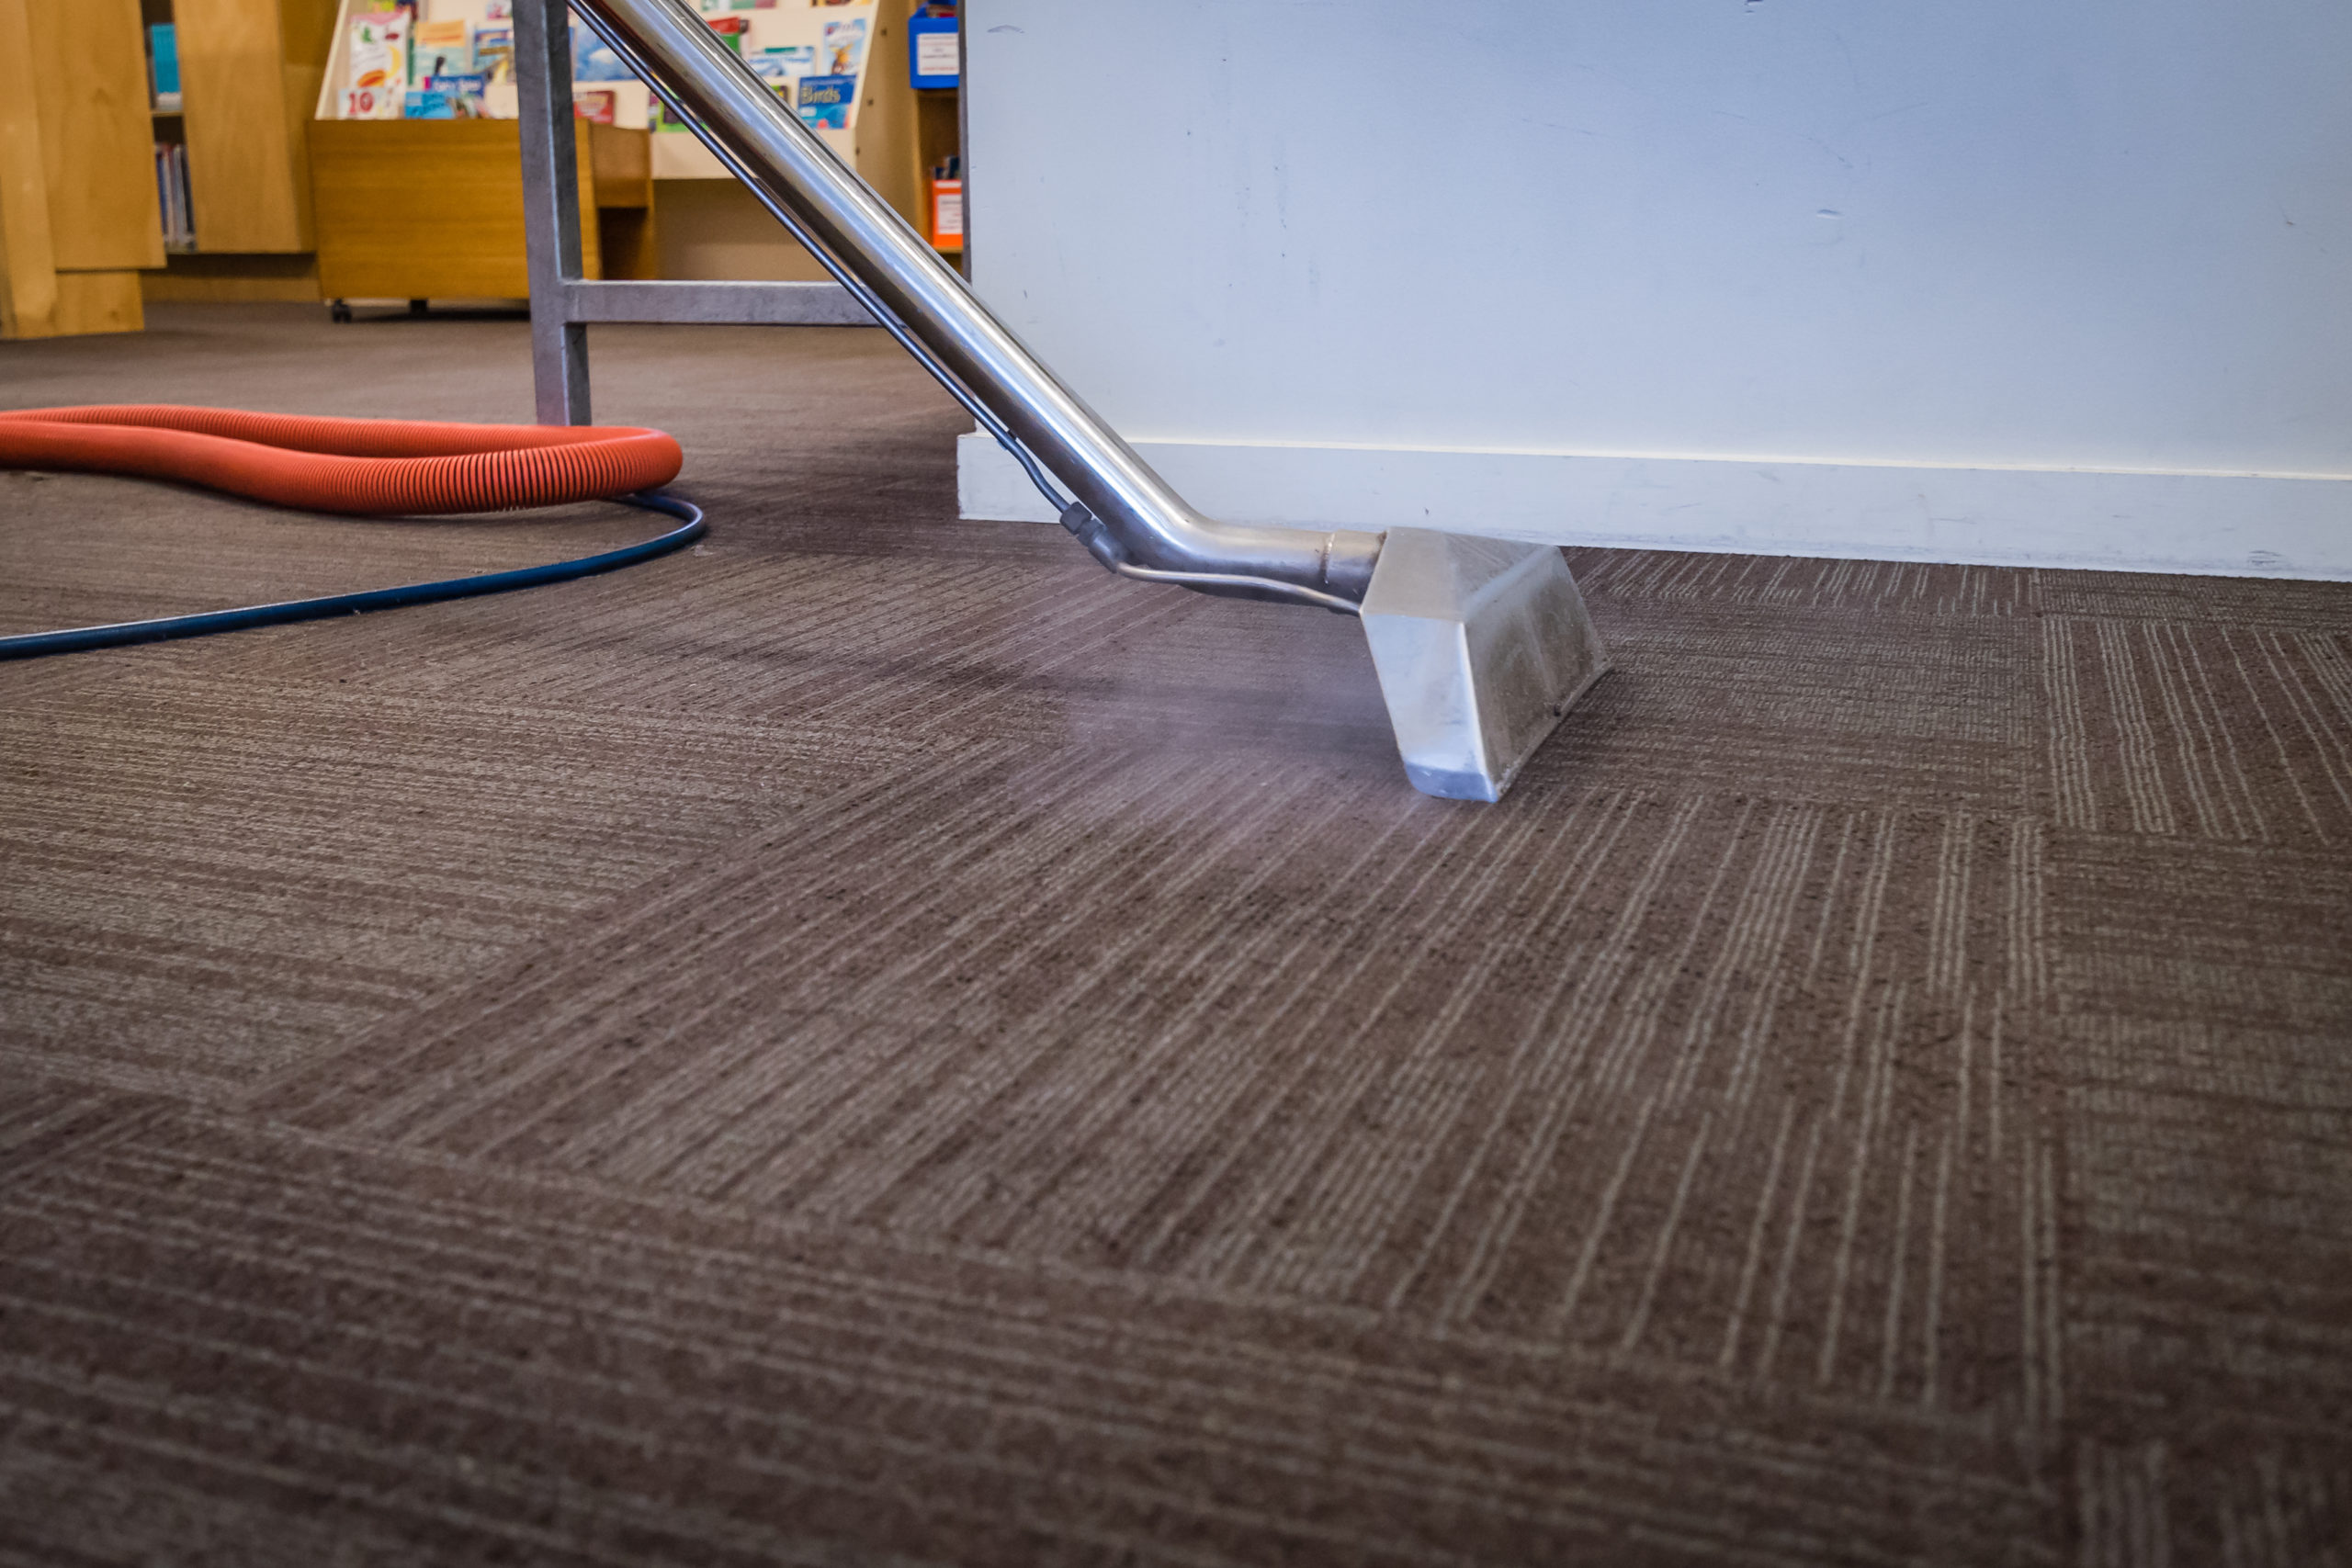 A vacuum is on the floor of a library